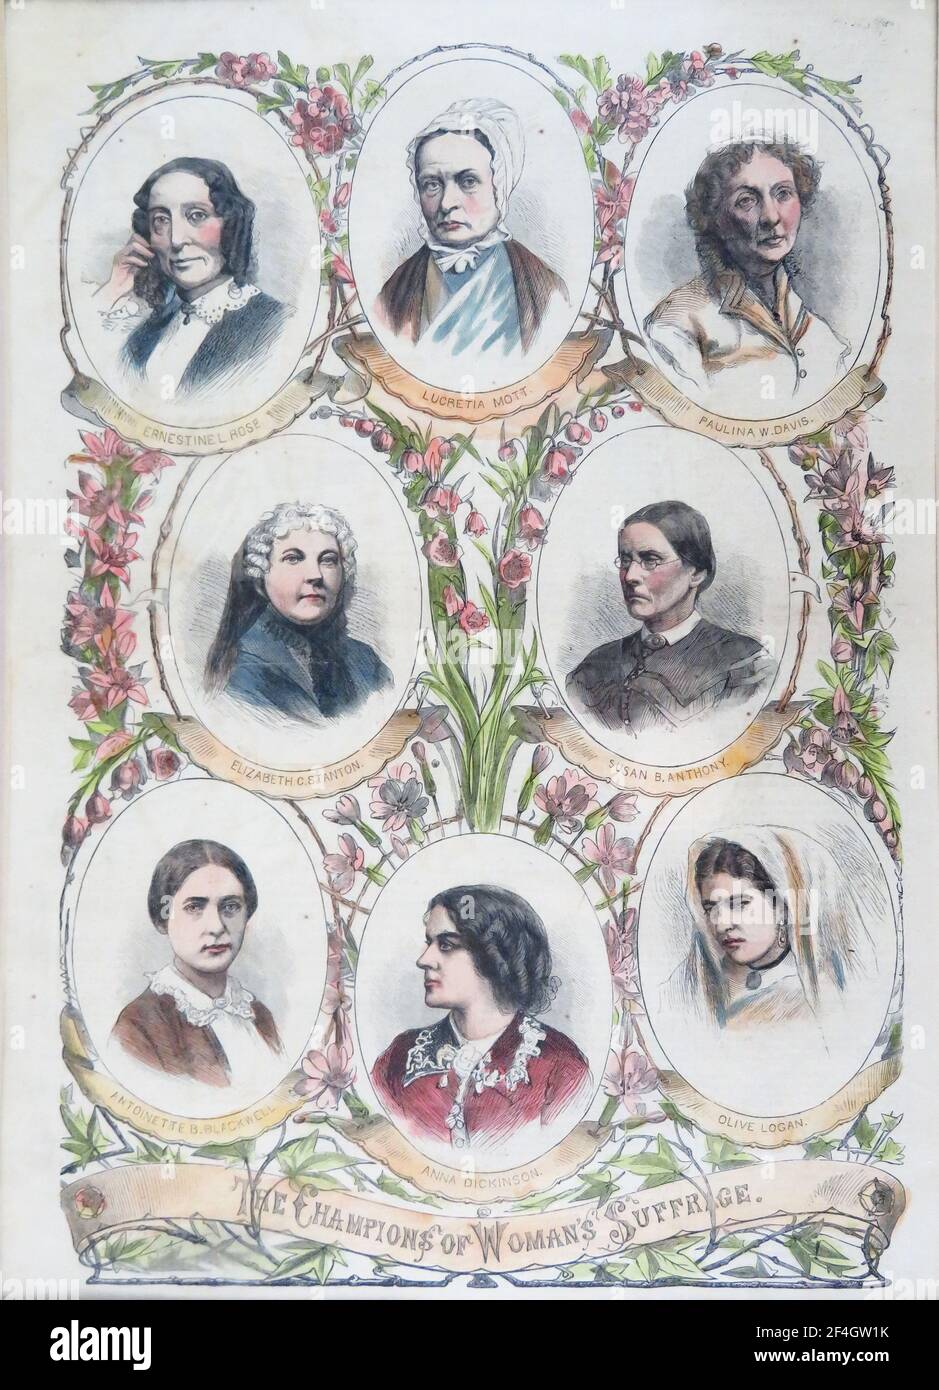 Poster or print with portrait illustrations of eight female suffrage leaders, printed for the American market, 1800. Photography by Emilia van Beugen. () Stock Photo